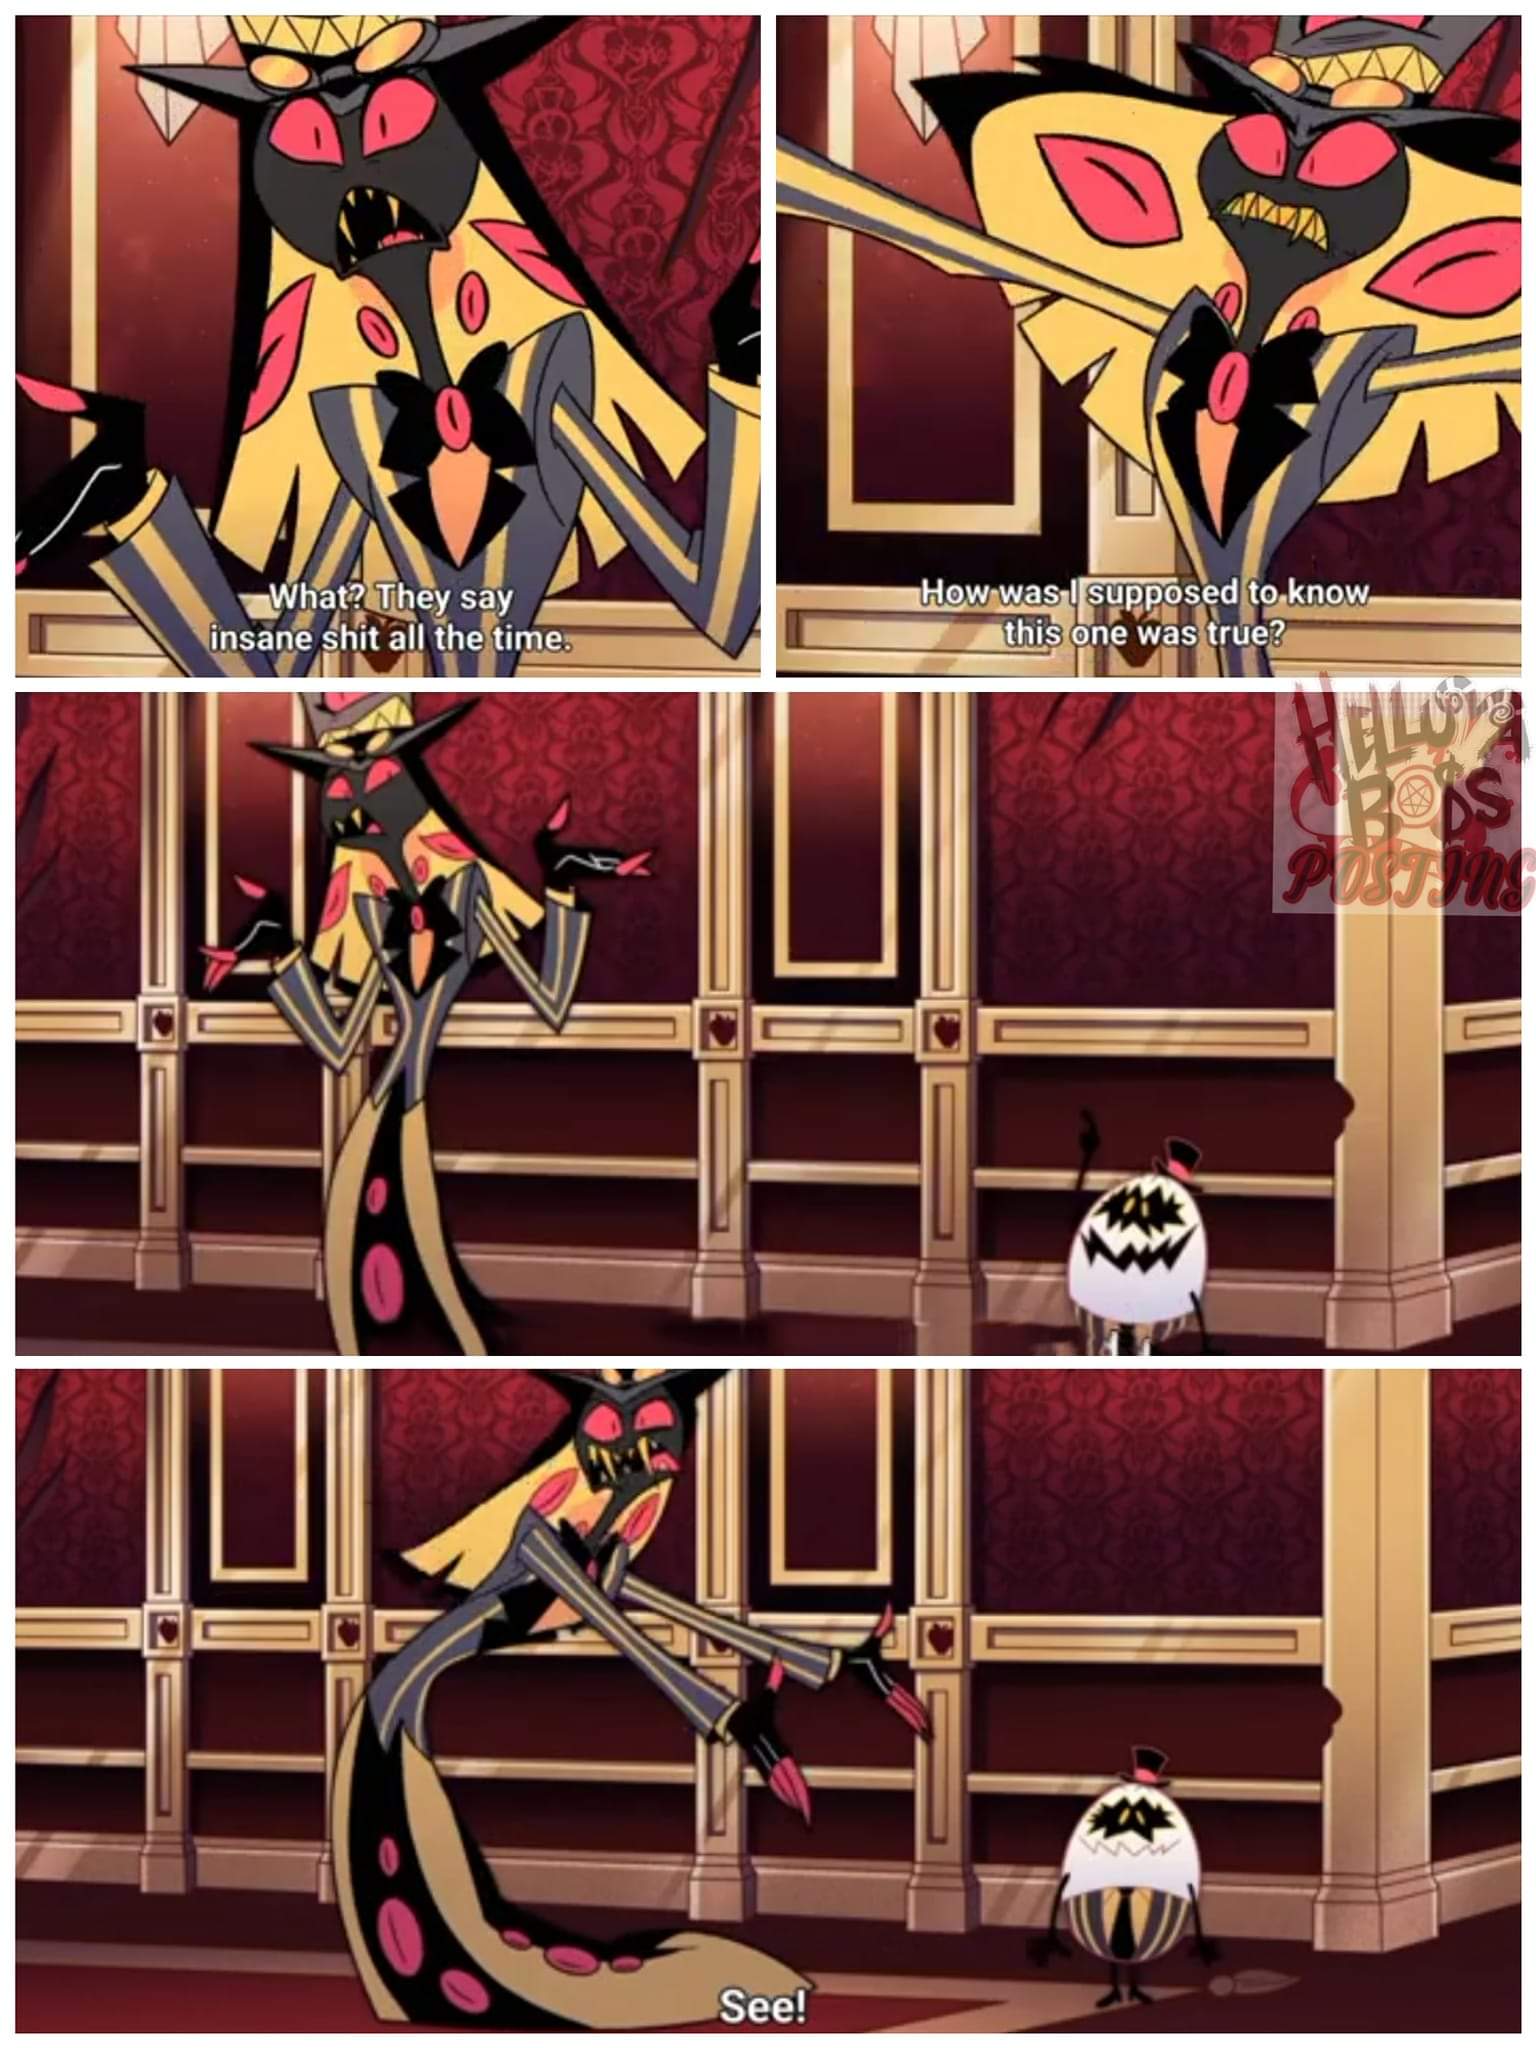 Sir Pentious They Say Insane Shit All the Time Blank Meme Template